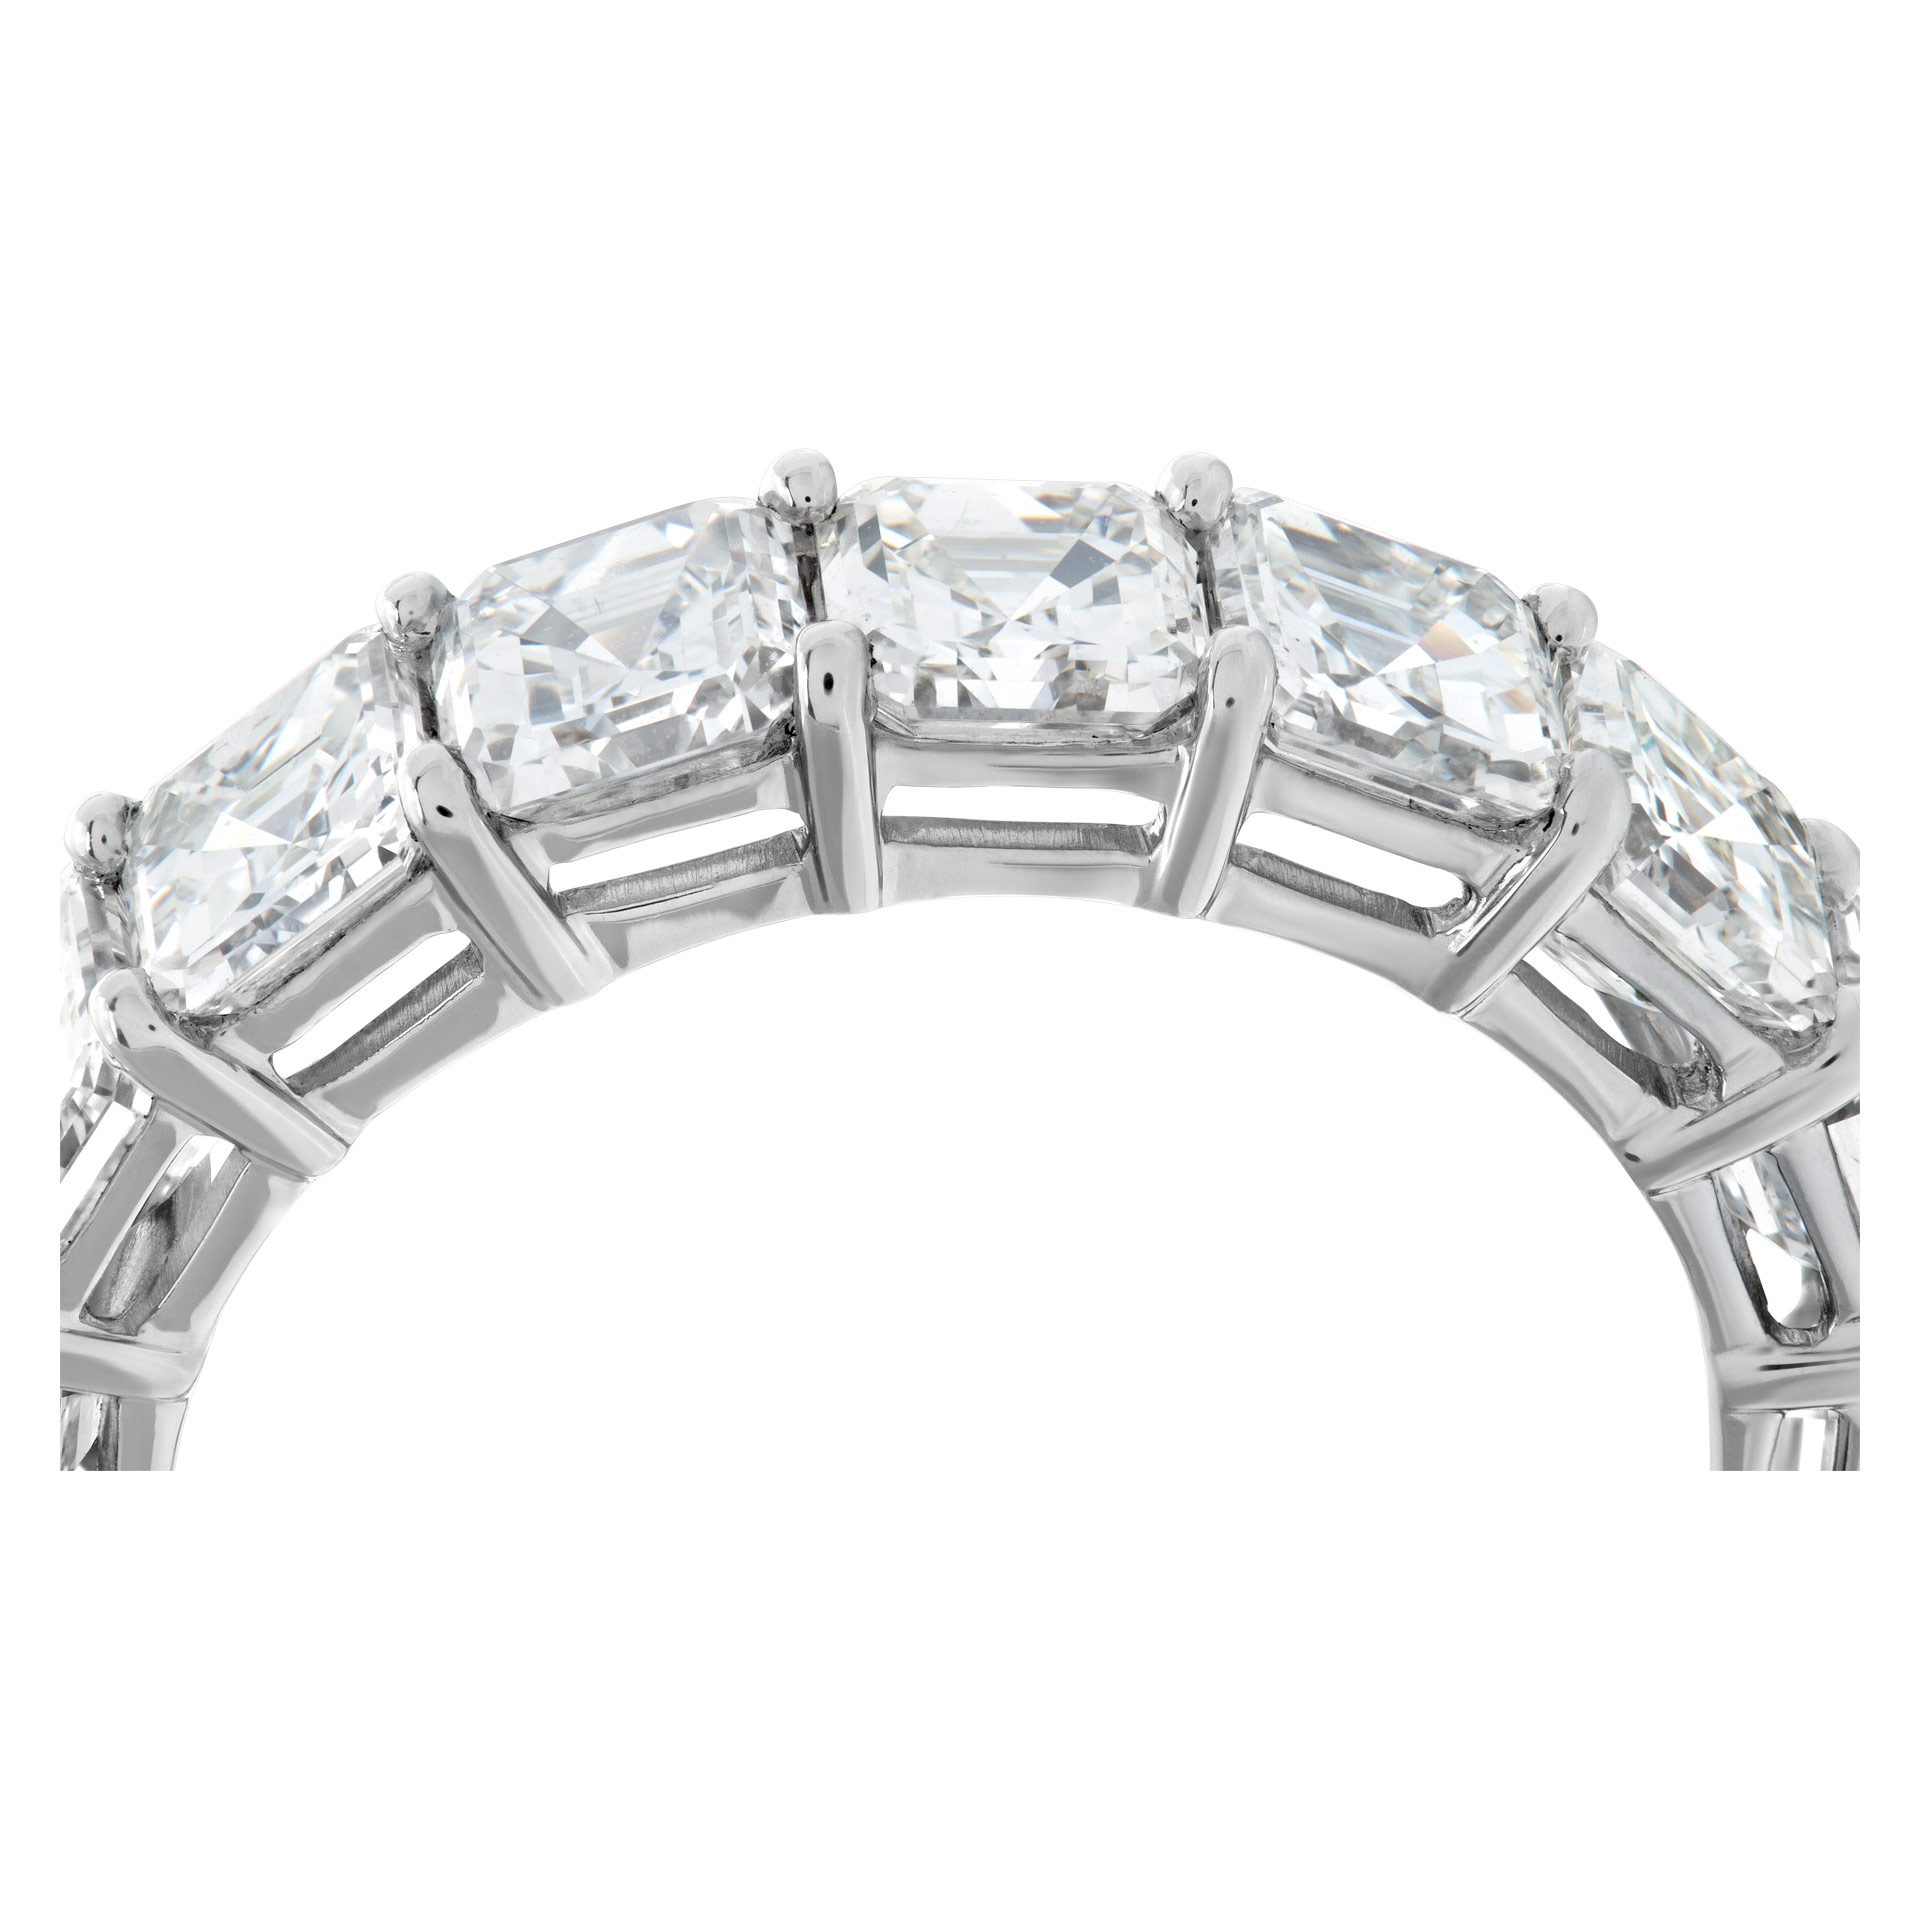 Diamond eternity band  asscher cut in platinum with 4.62 carats image 4